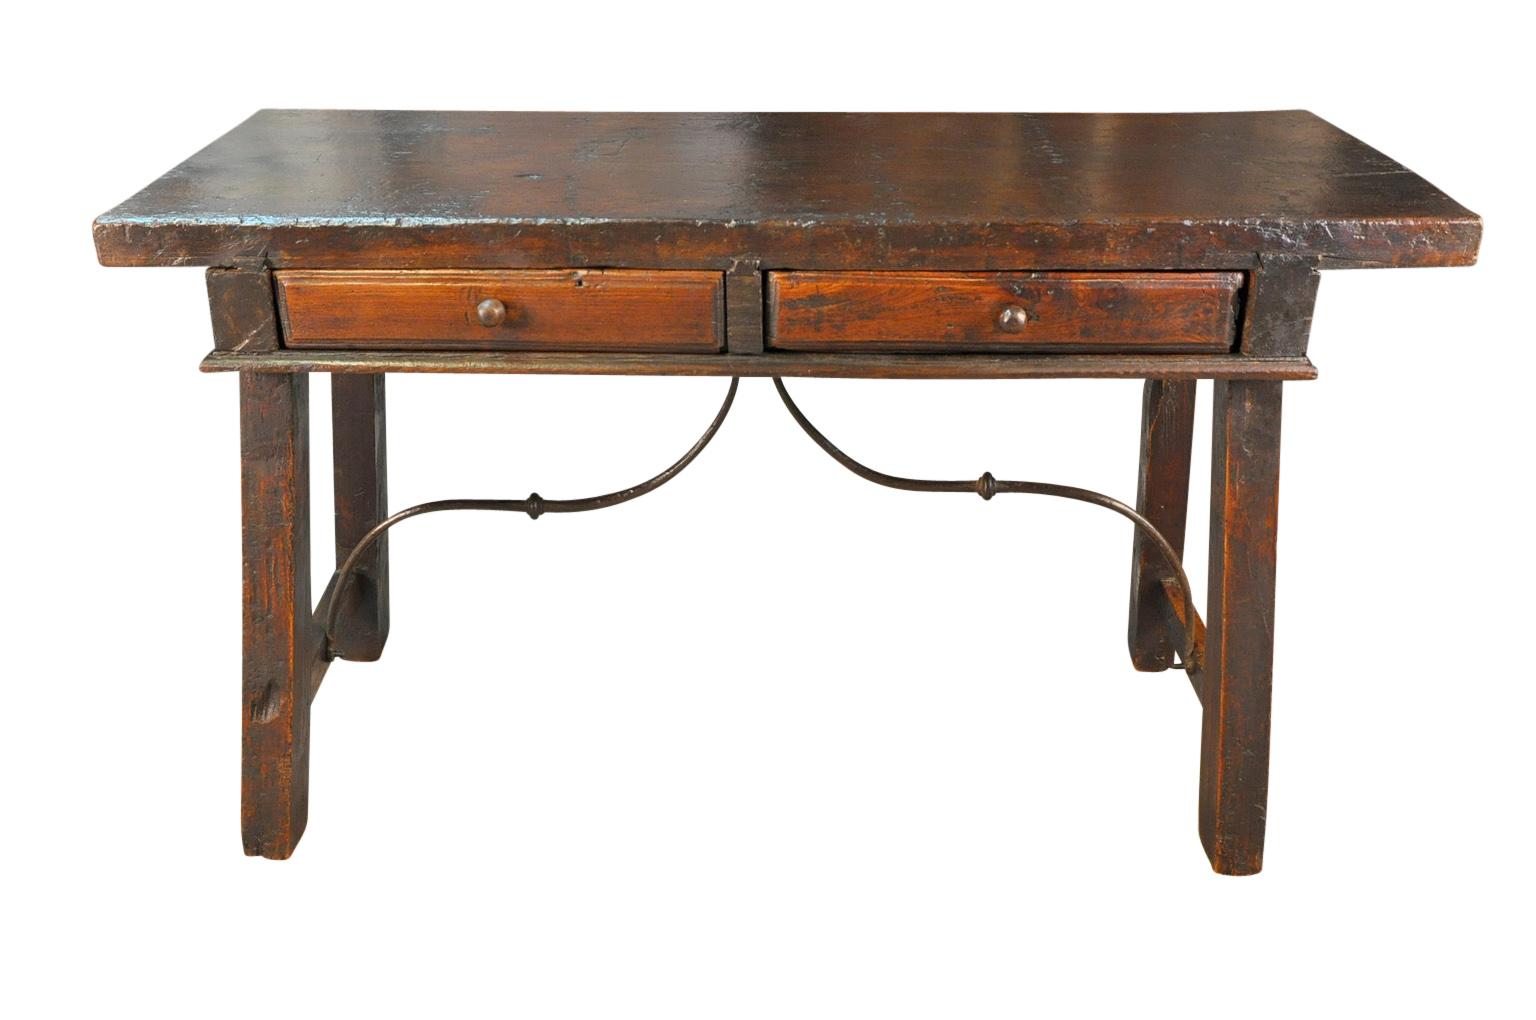 An outstanding 18th century writing table, console from the Catalan region of Spain. Beautifully constructed from wonderful walnut and hand forged iron stretchers - with two drawers and a stunning solid board top. Super patina.